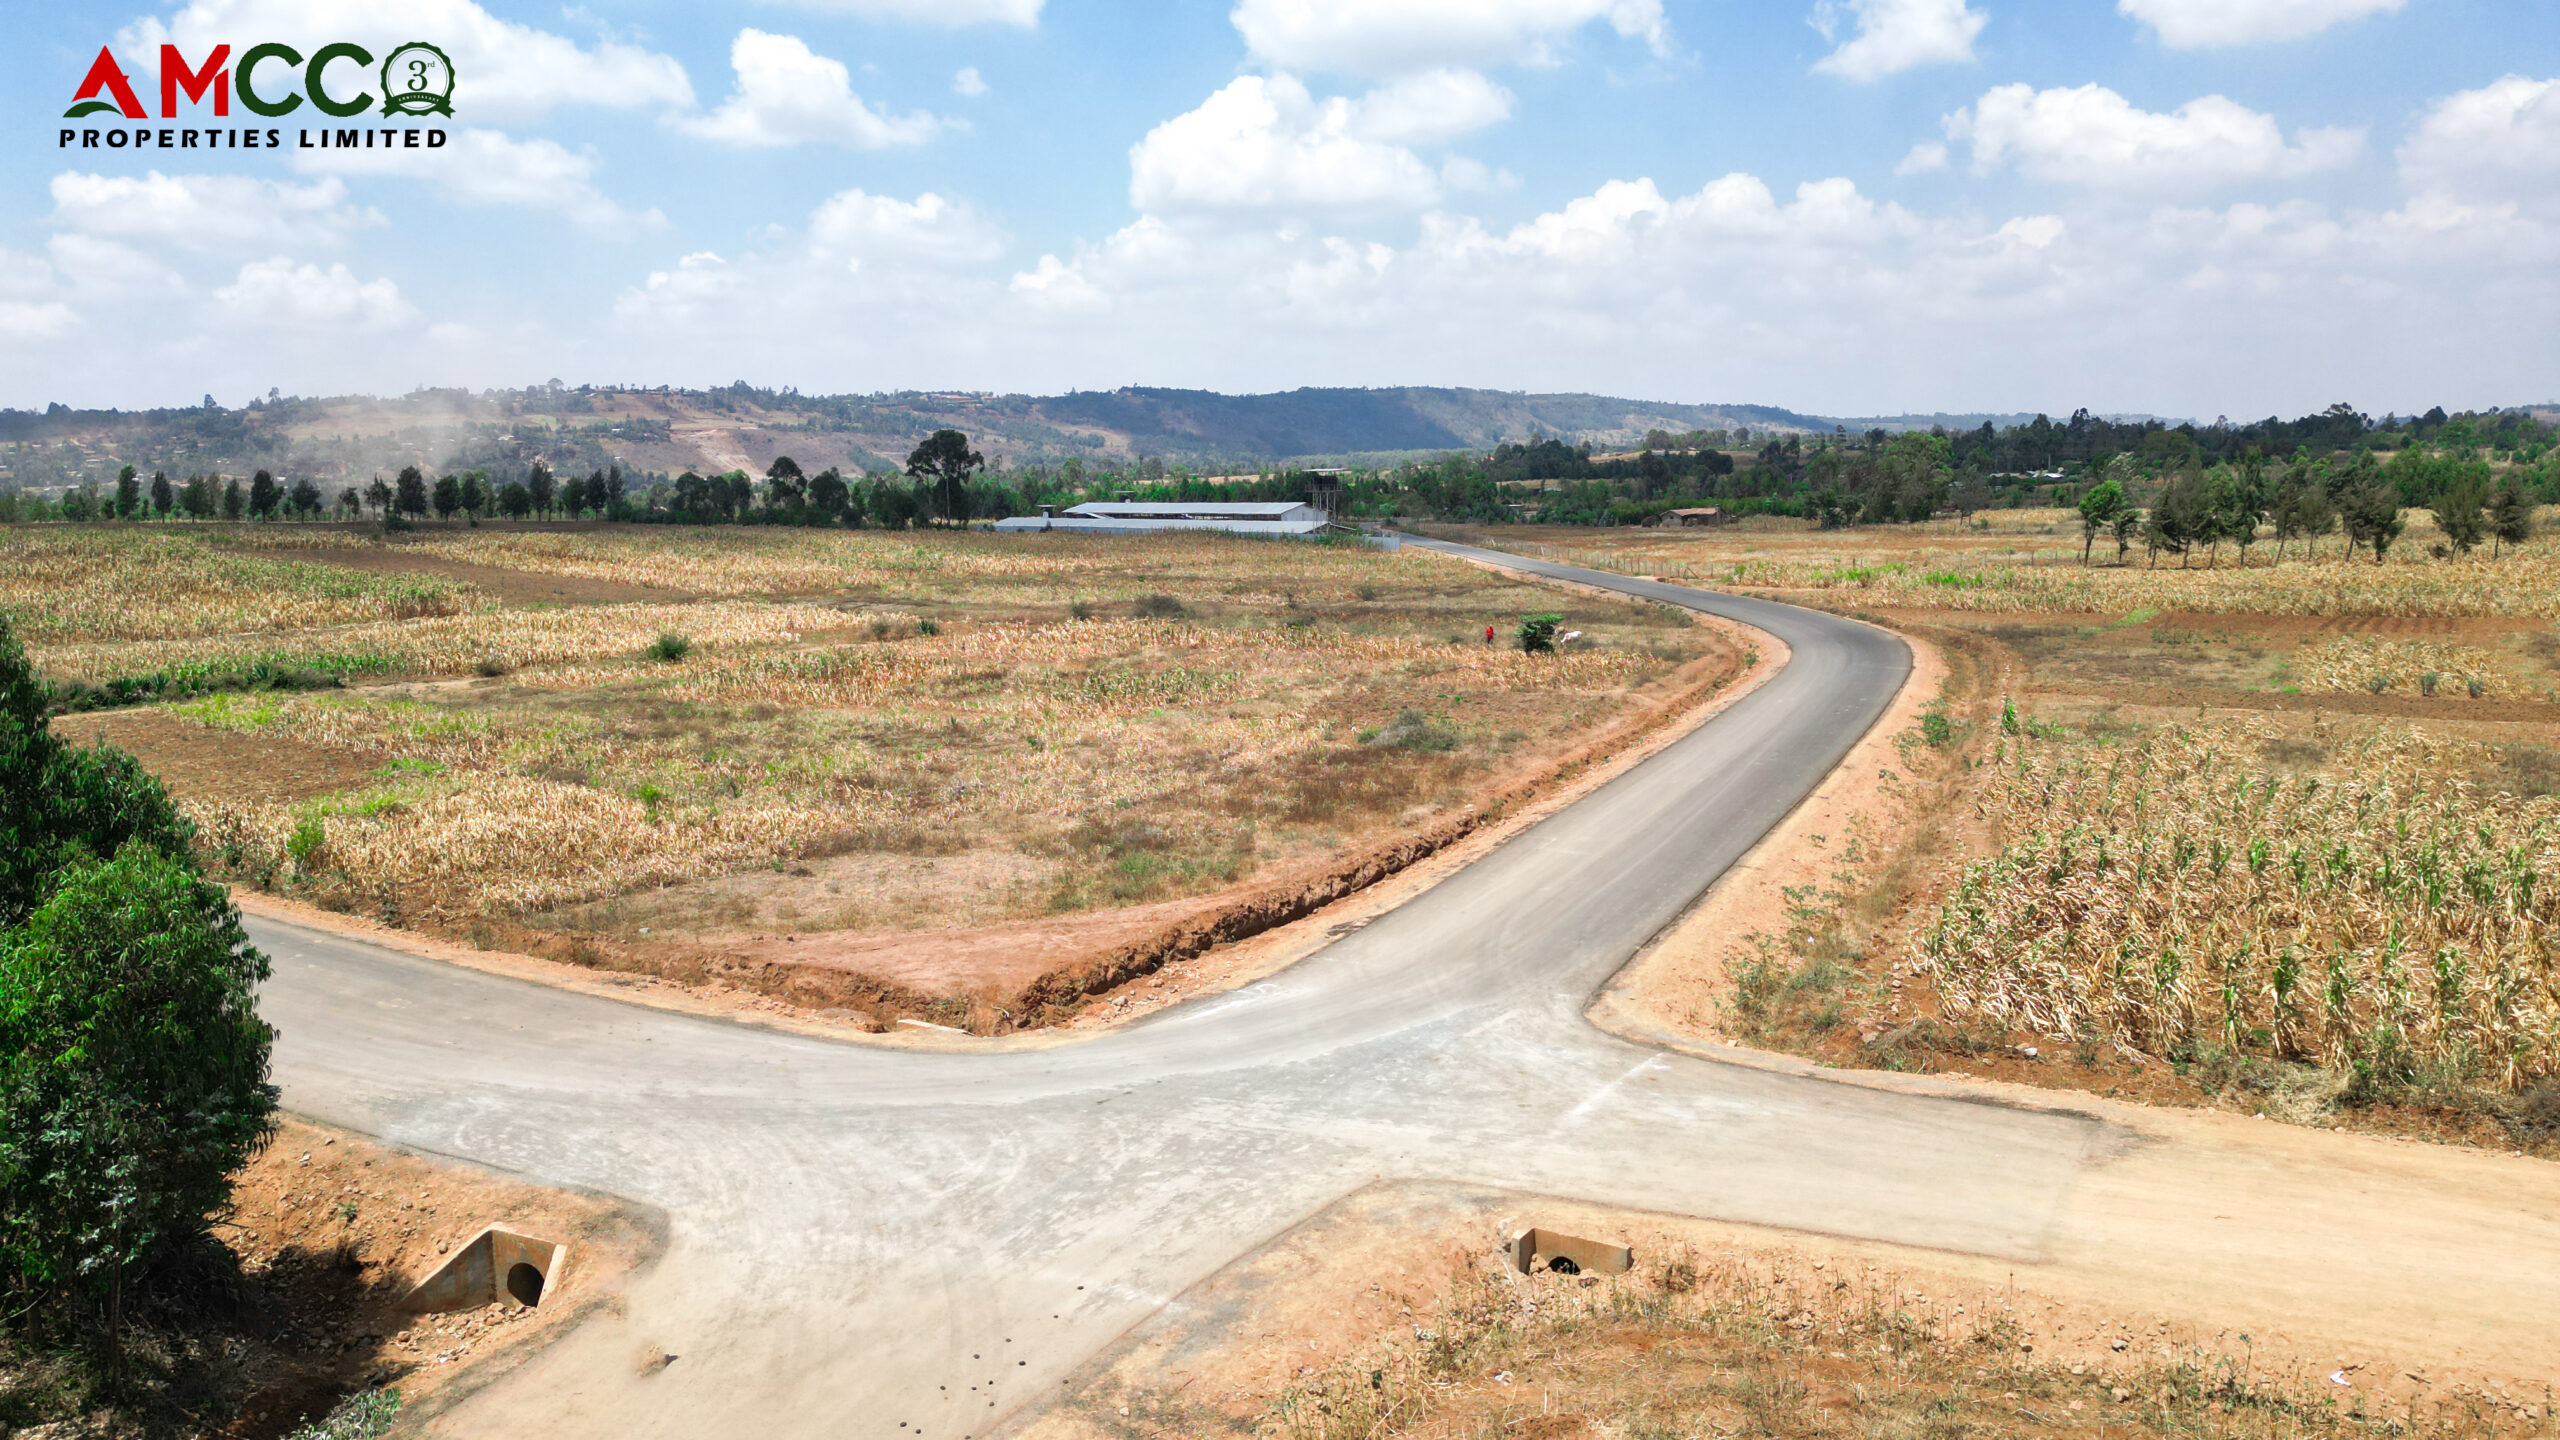 What Foreigners Need To Know About Owning land in Kenya